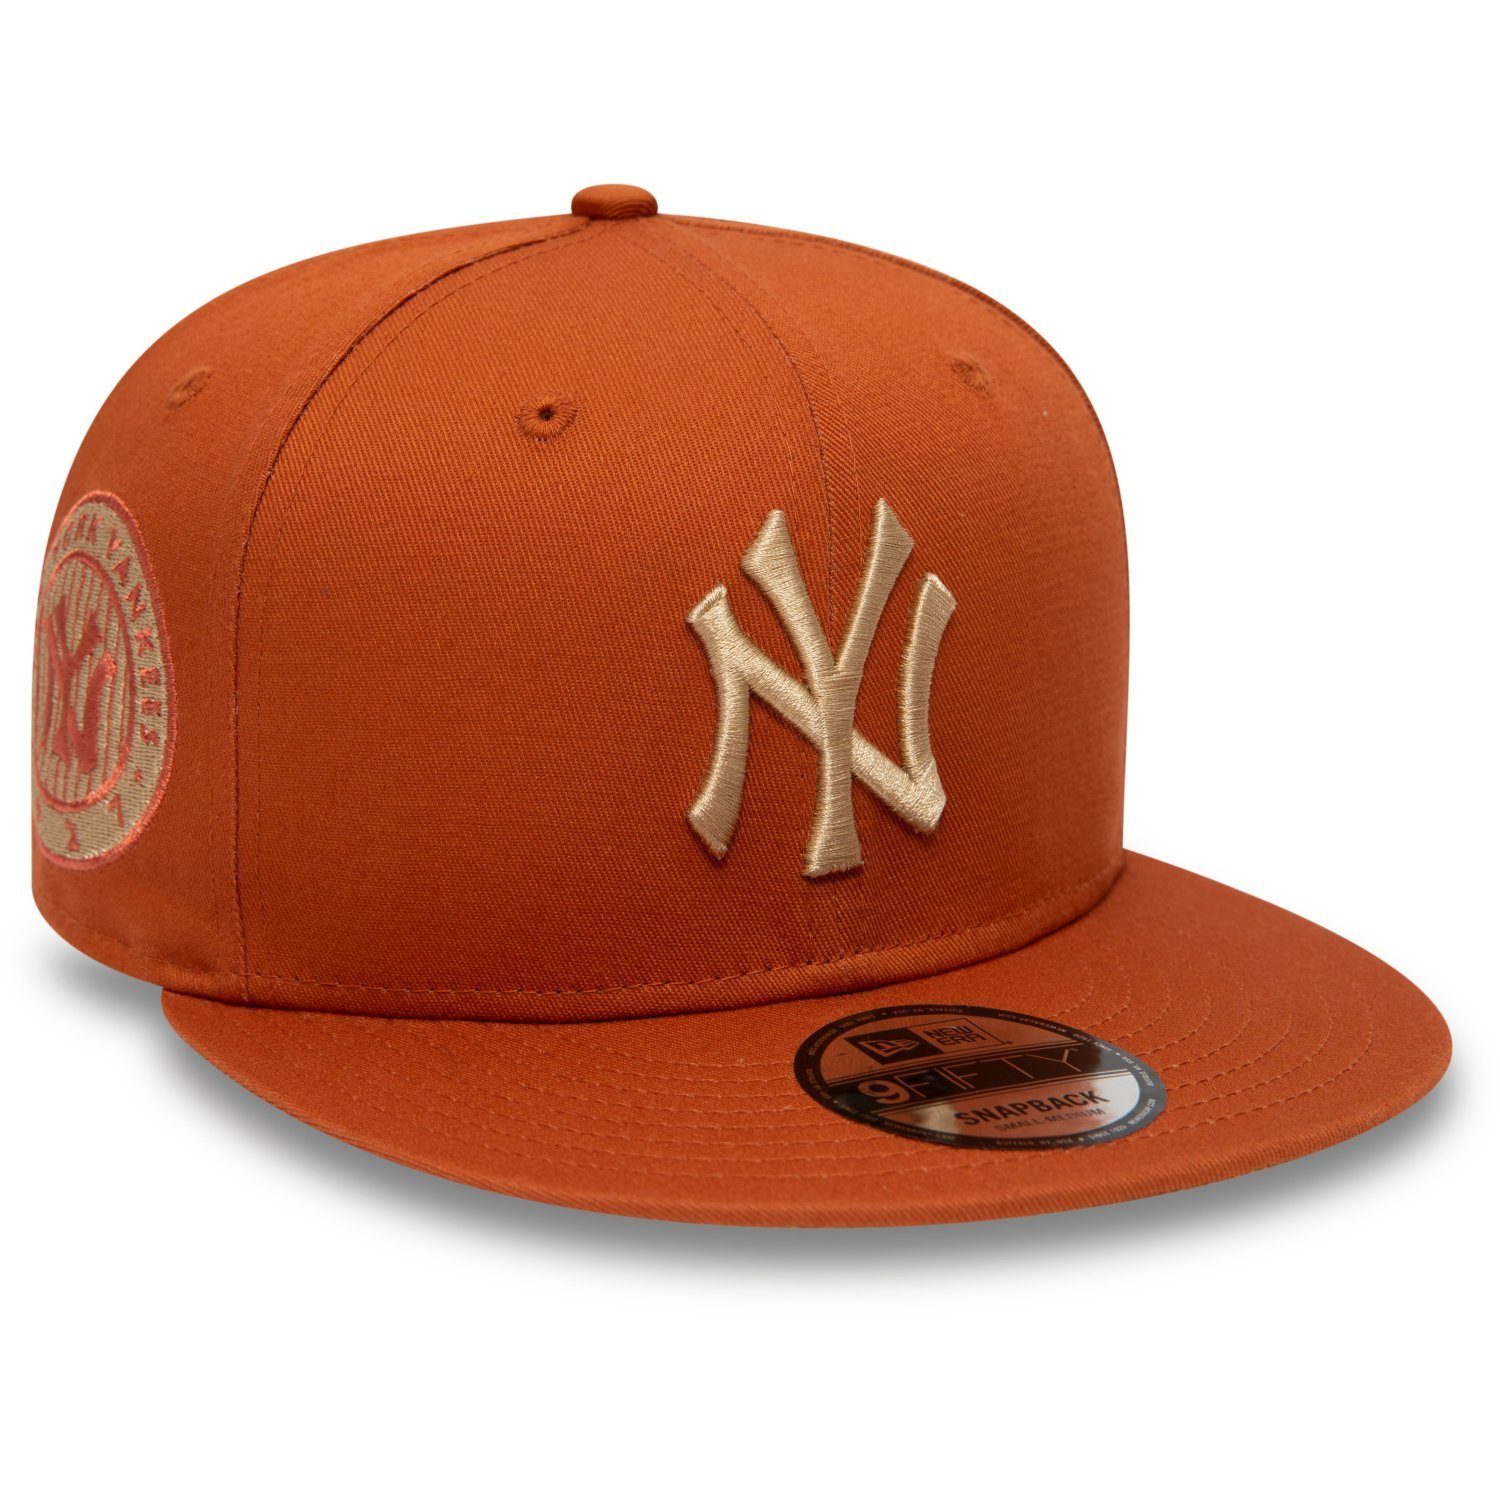 New Era Snapback Cap PATCH SIDE Yankees 9Fifty York rost New